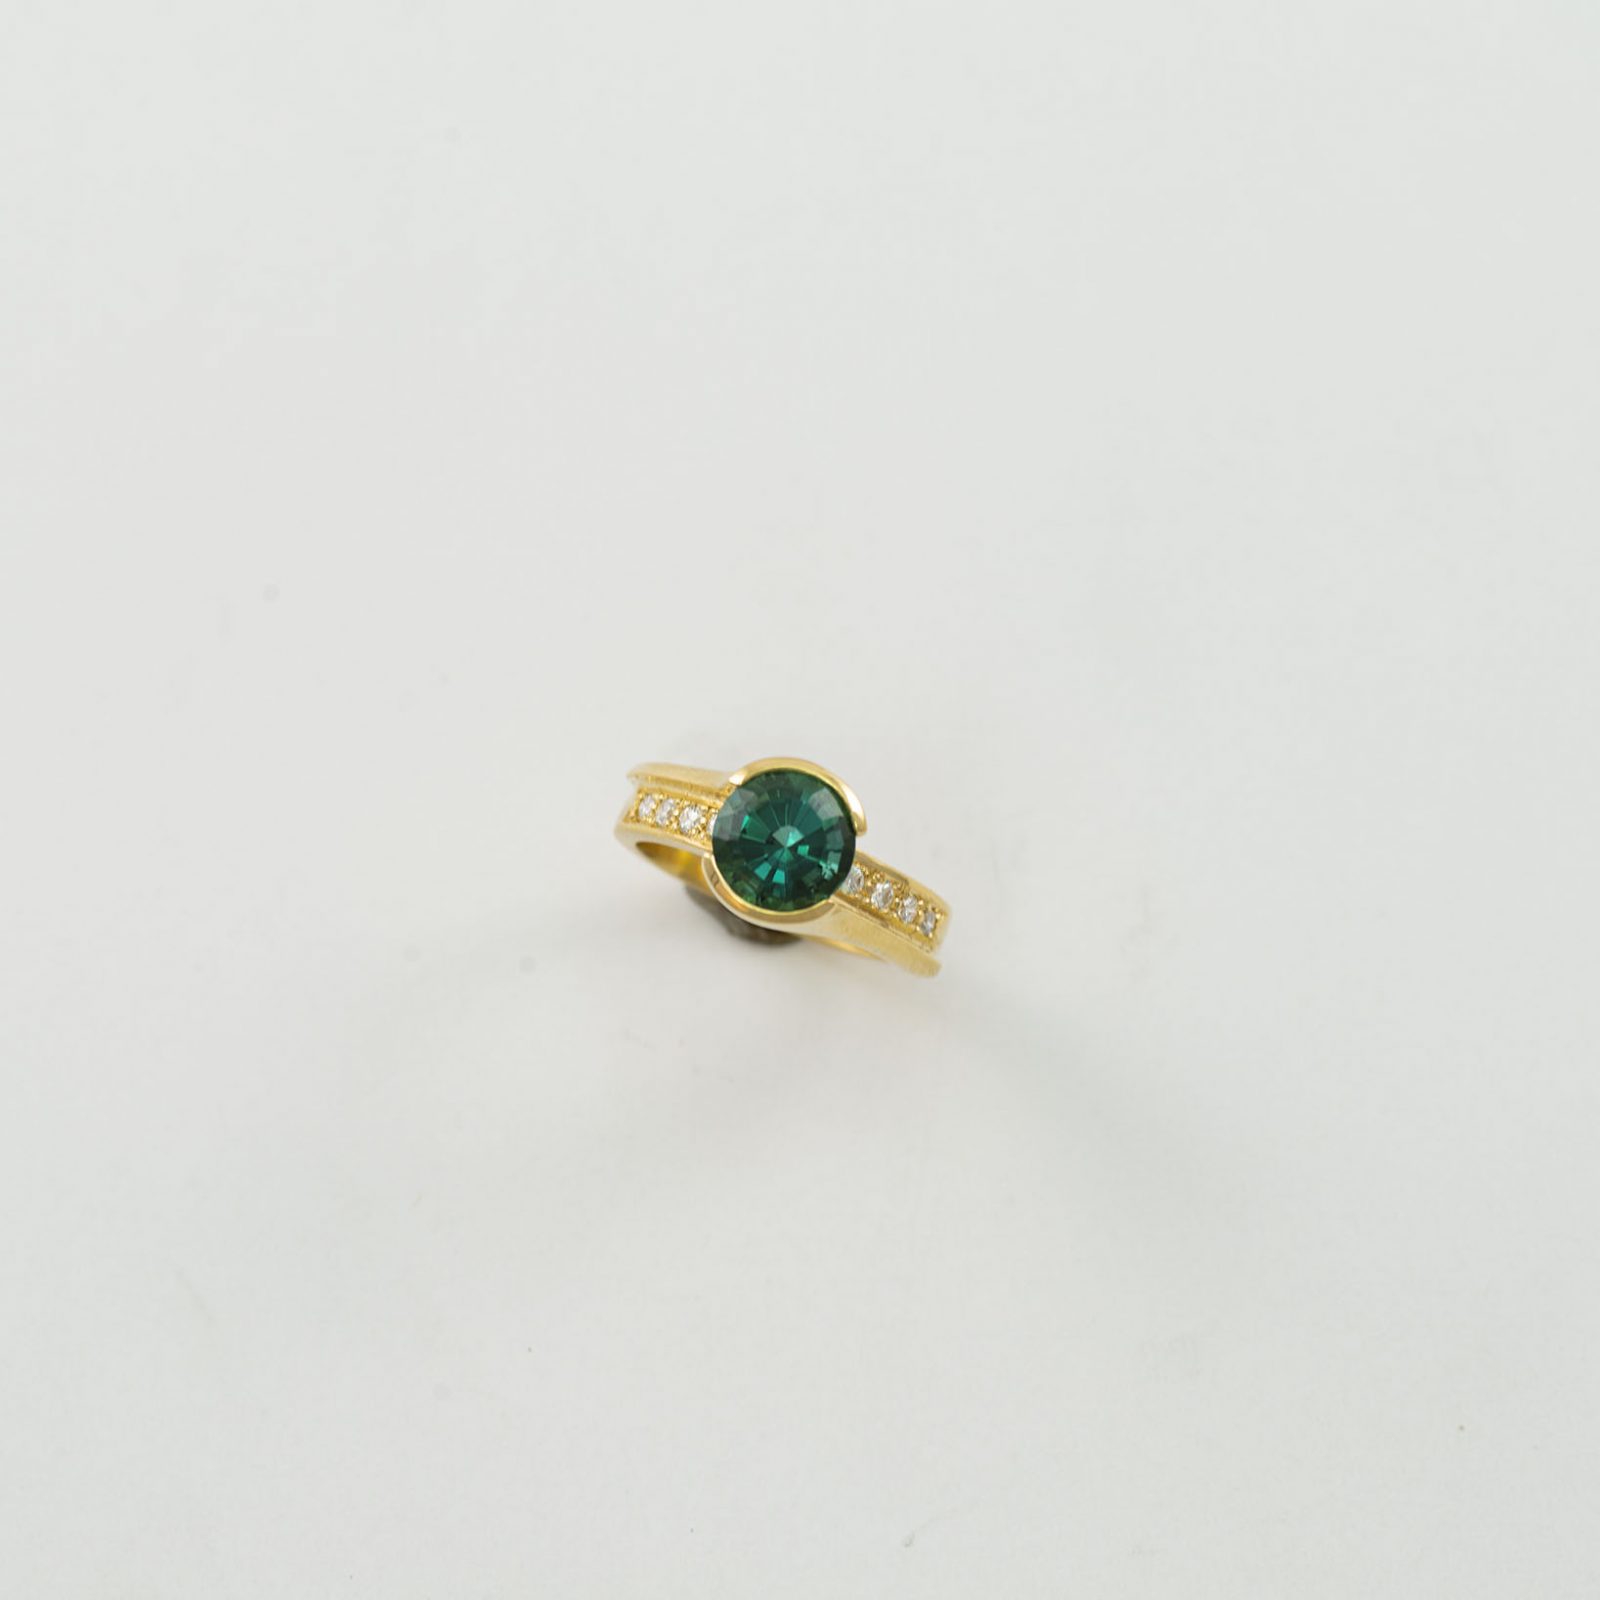 Green Tourmaline Ring in 14kt yellow gold with diamond accents.